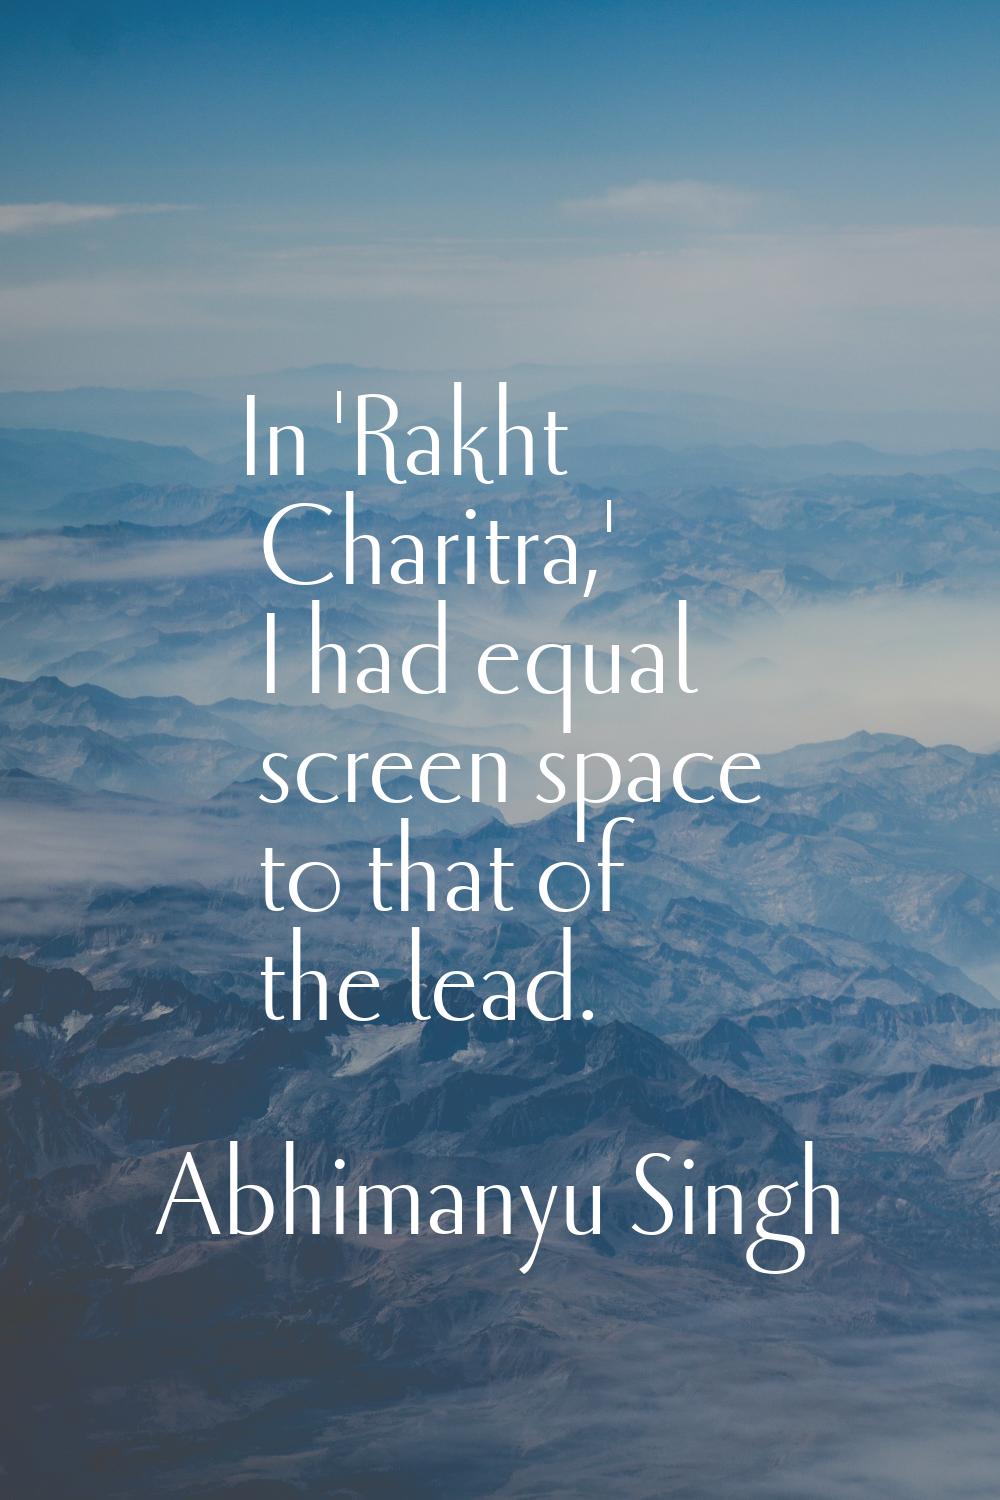 In 'Rakht Charitra,' I had equal screen space to that of the lead.